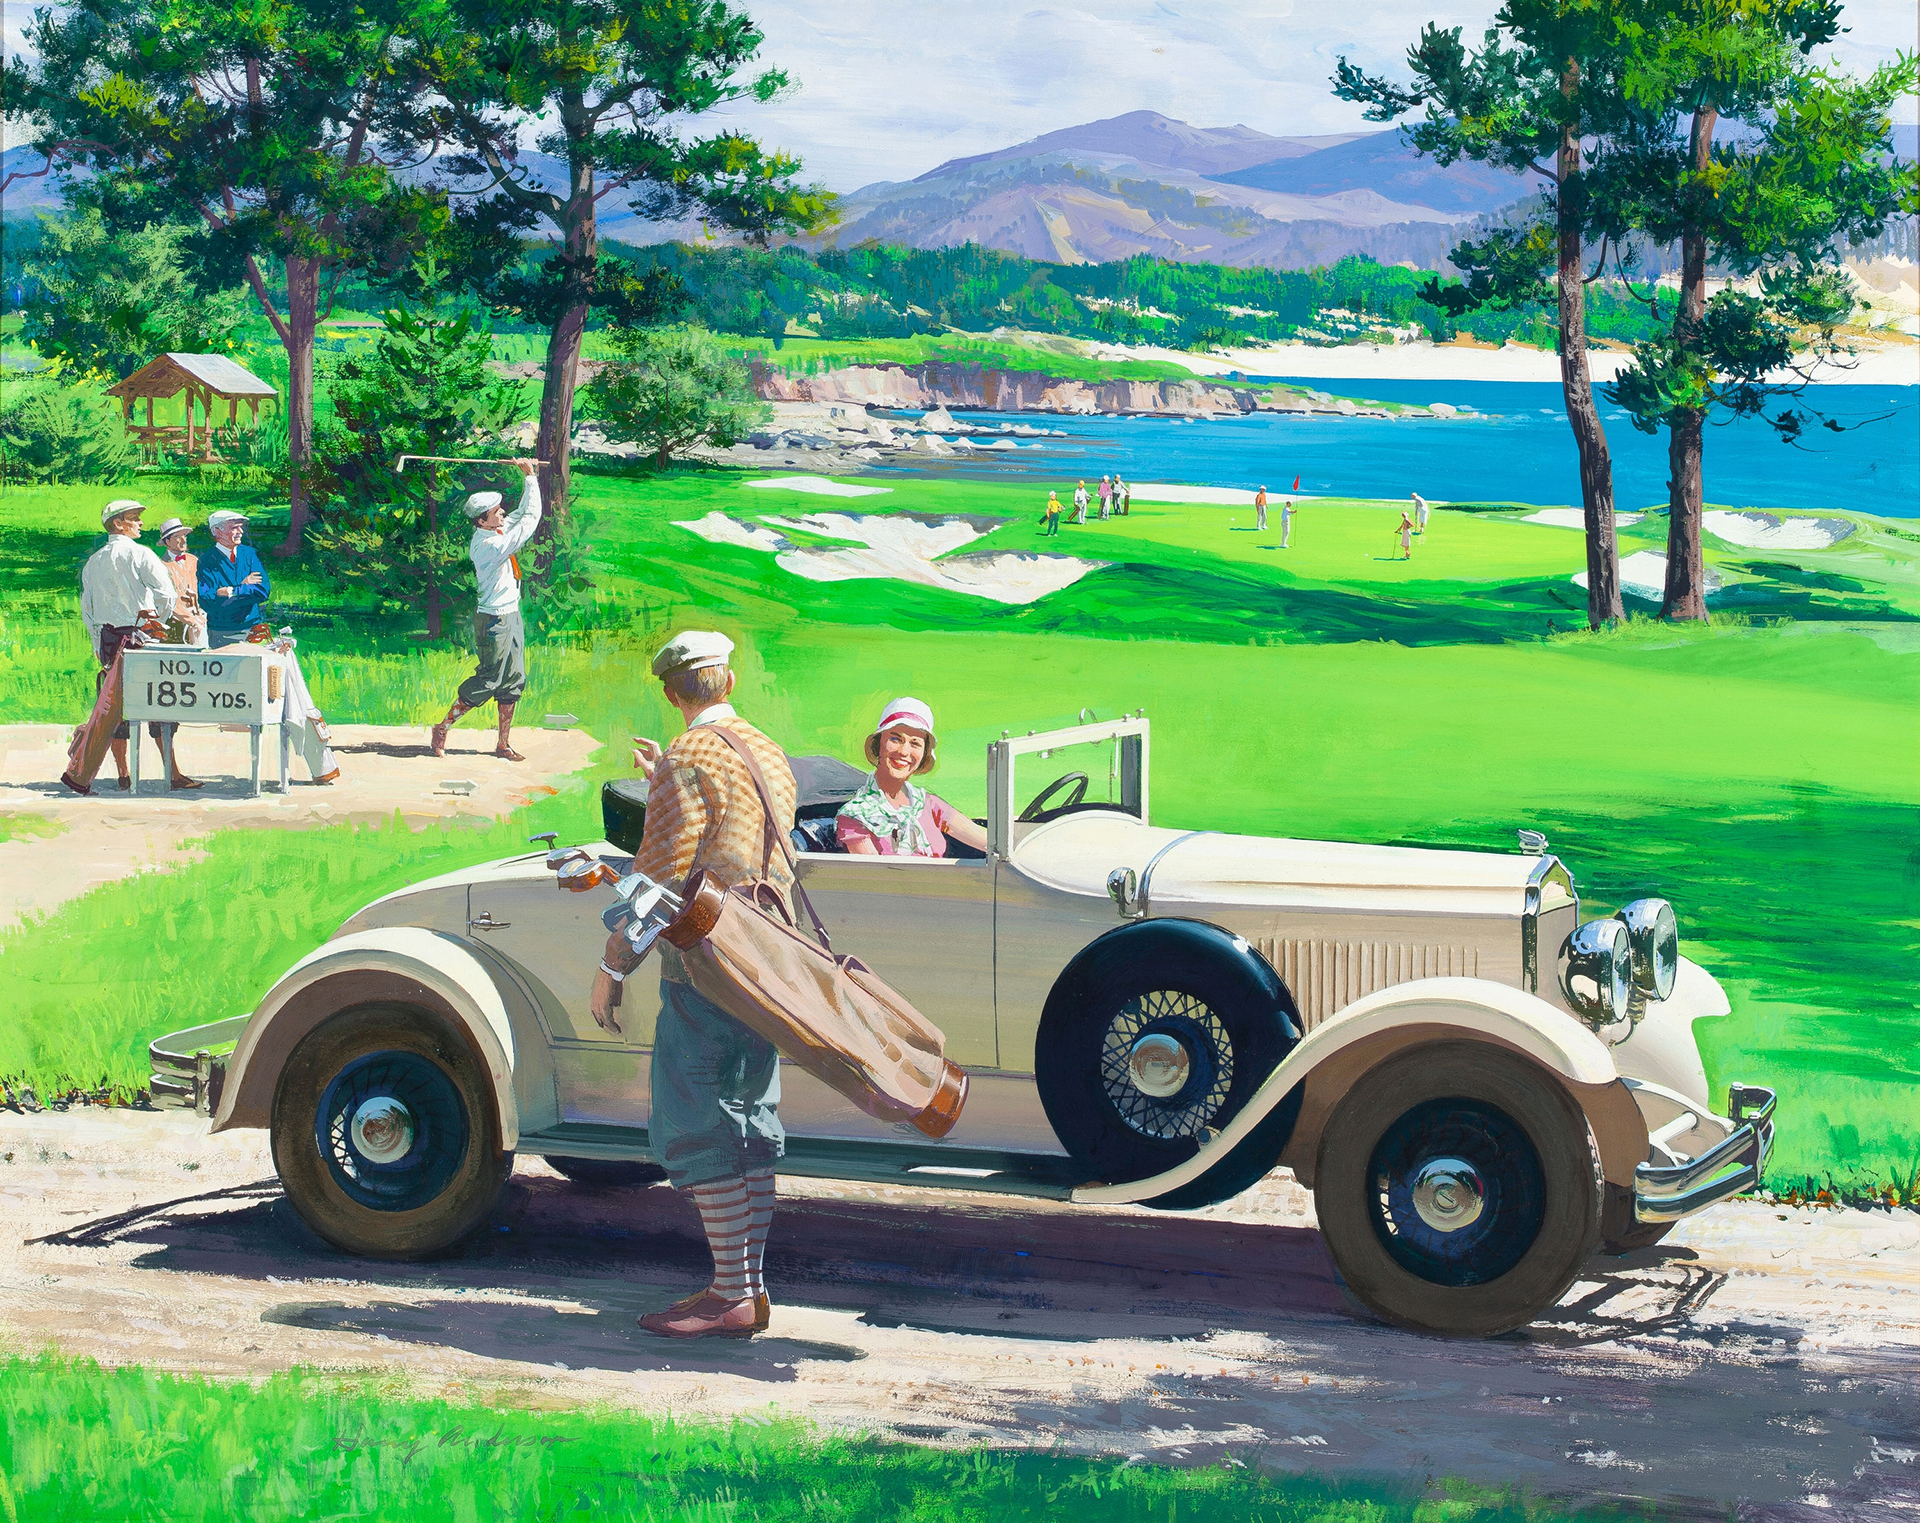 1929 Chrysler Imperial Roadster - Illustrated by Harry Anderson